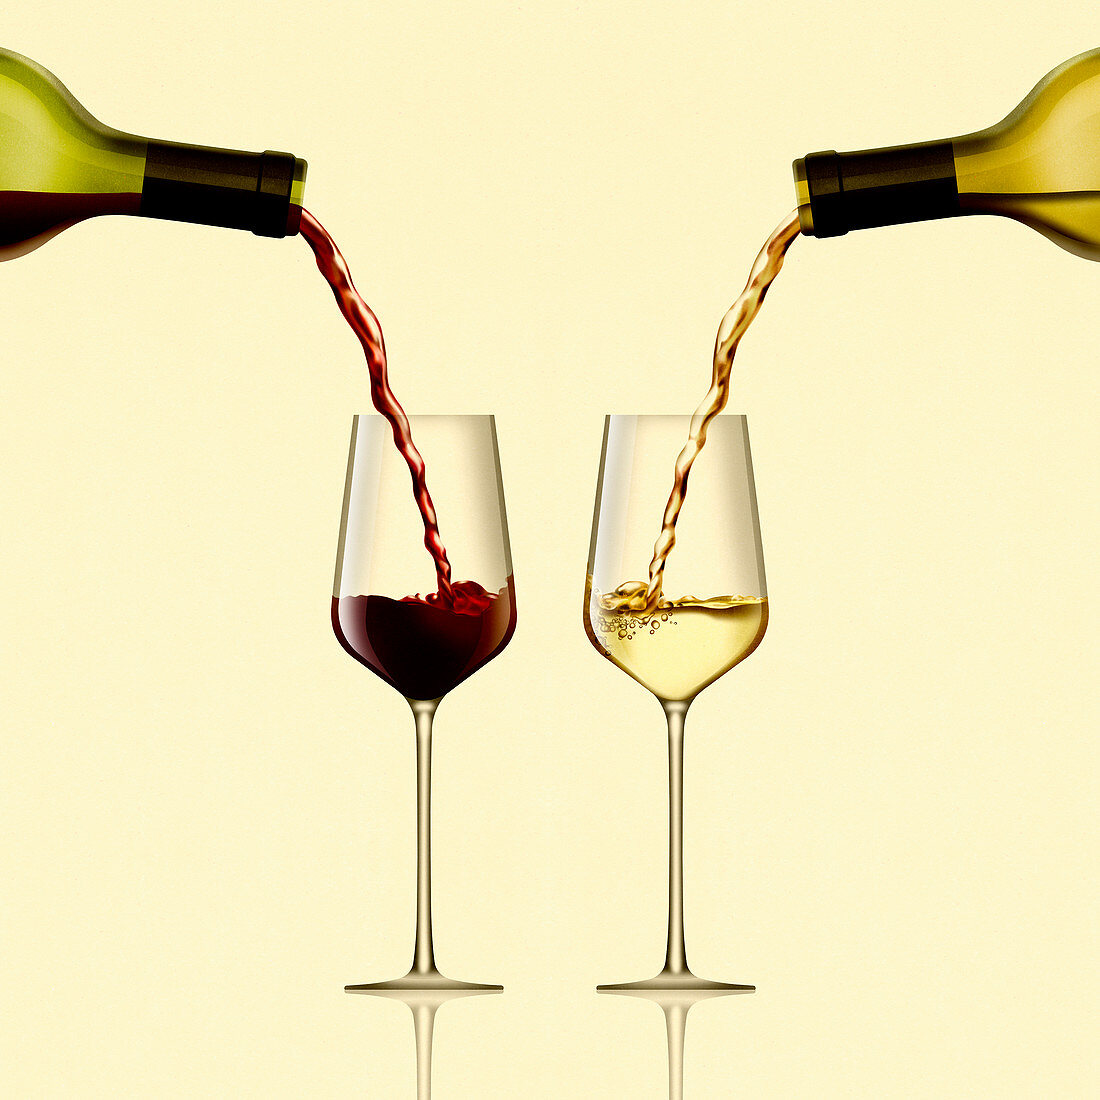 Red and white wine being poured, illustration